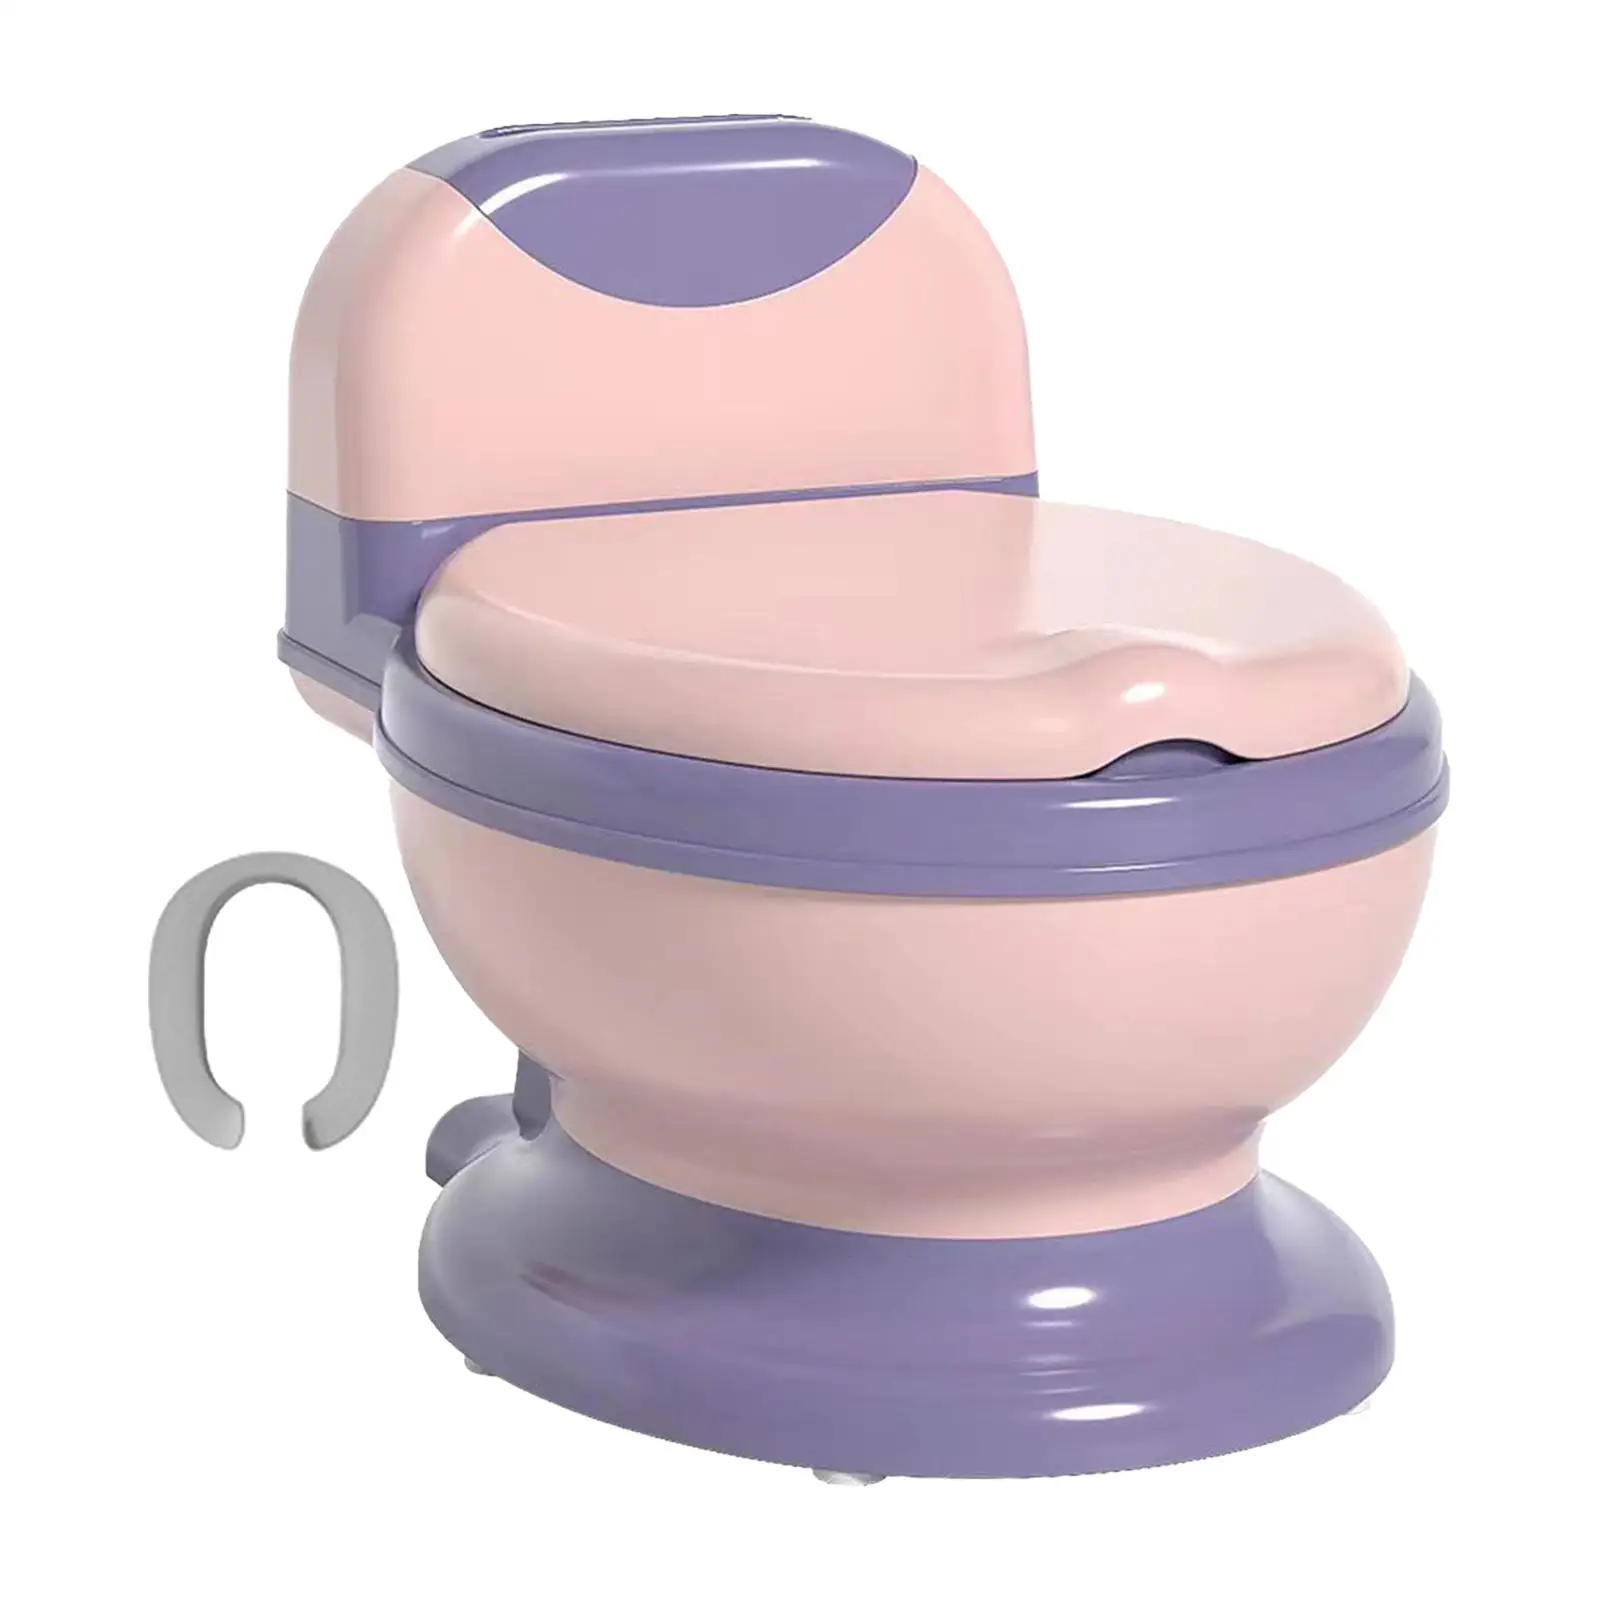 Potty Train Toilet Potty Train Seat Comfortable Realistic Toilet Real Feel Potty for Baby Toddlers Children Boys Girls